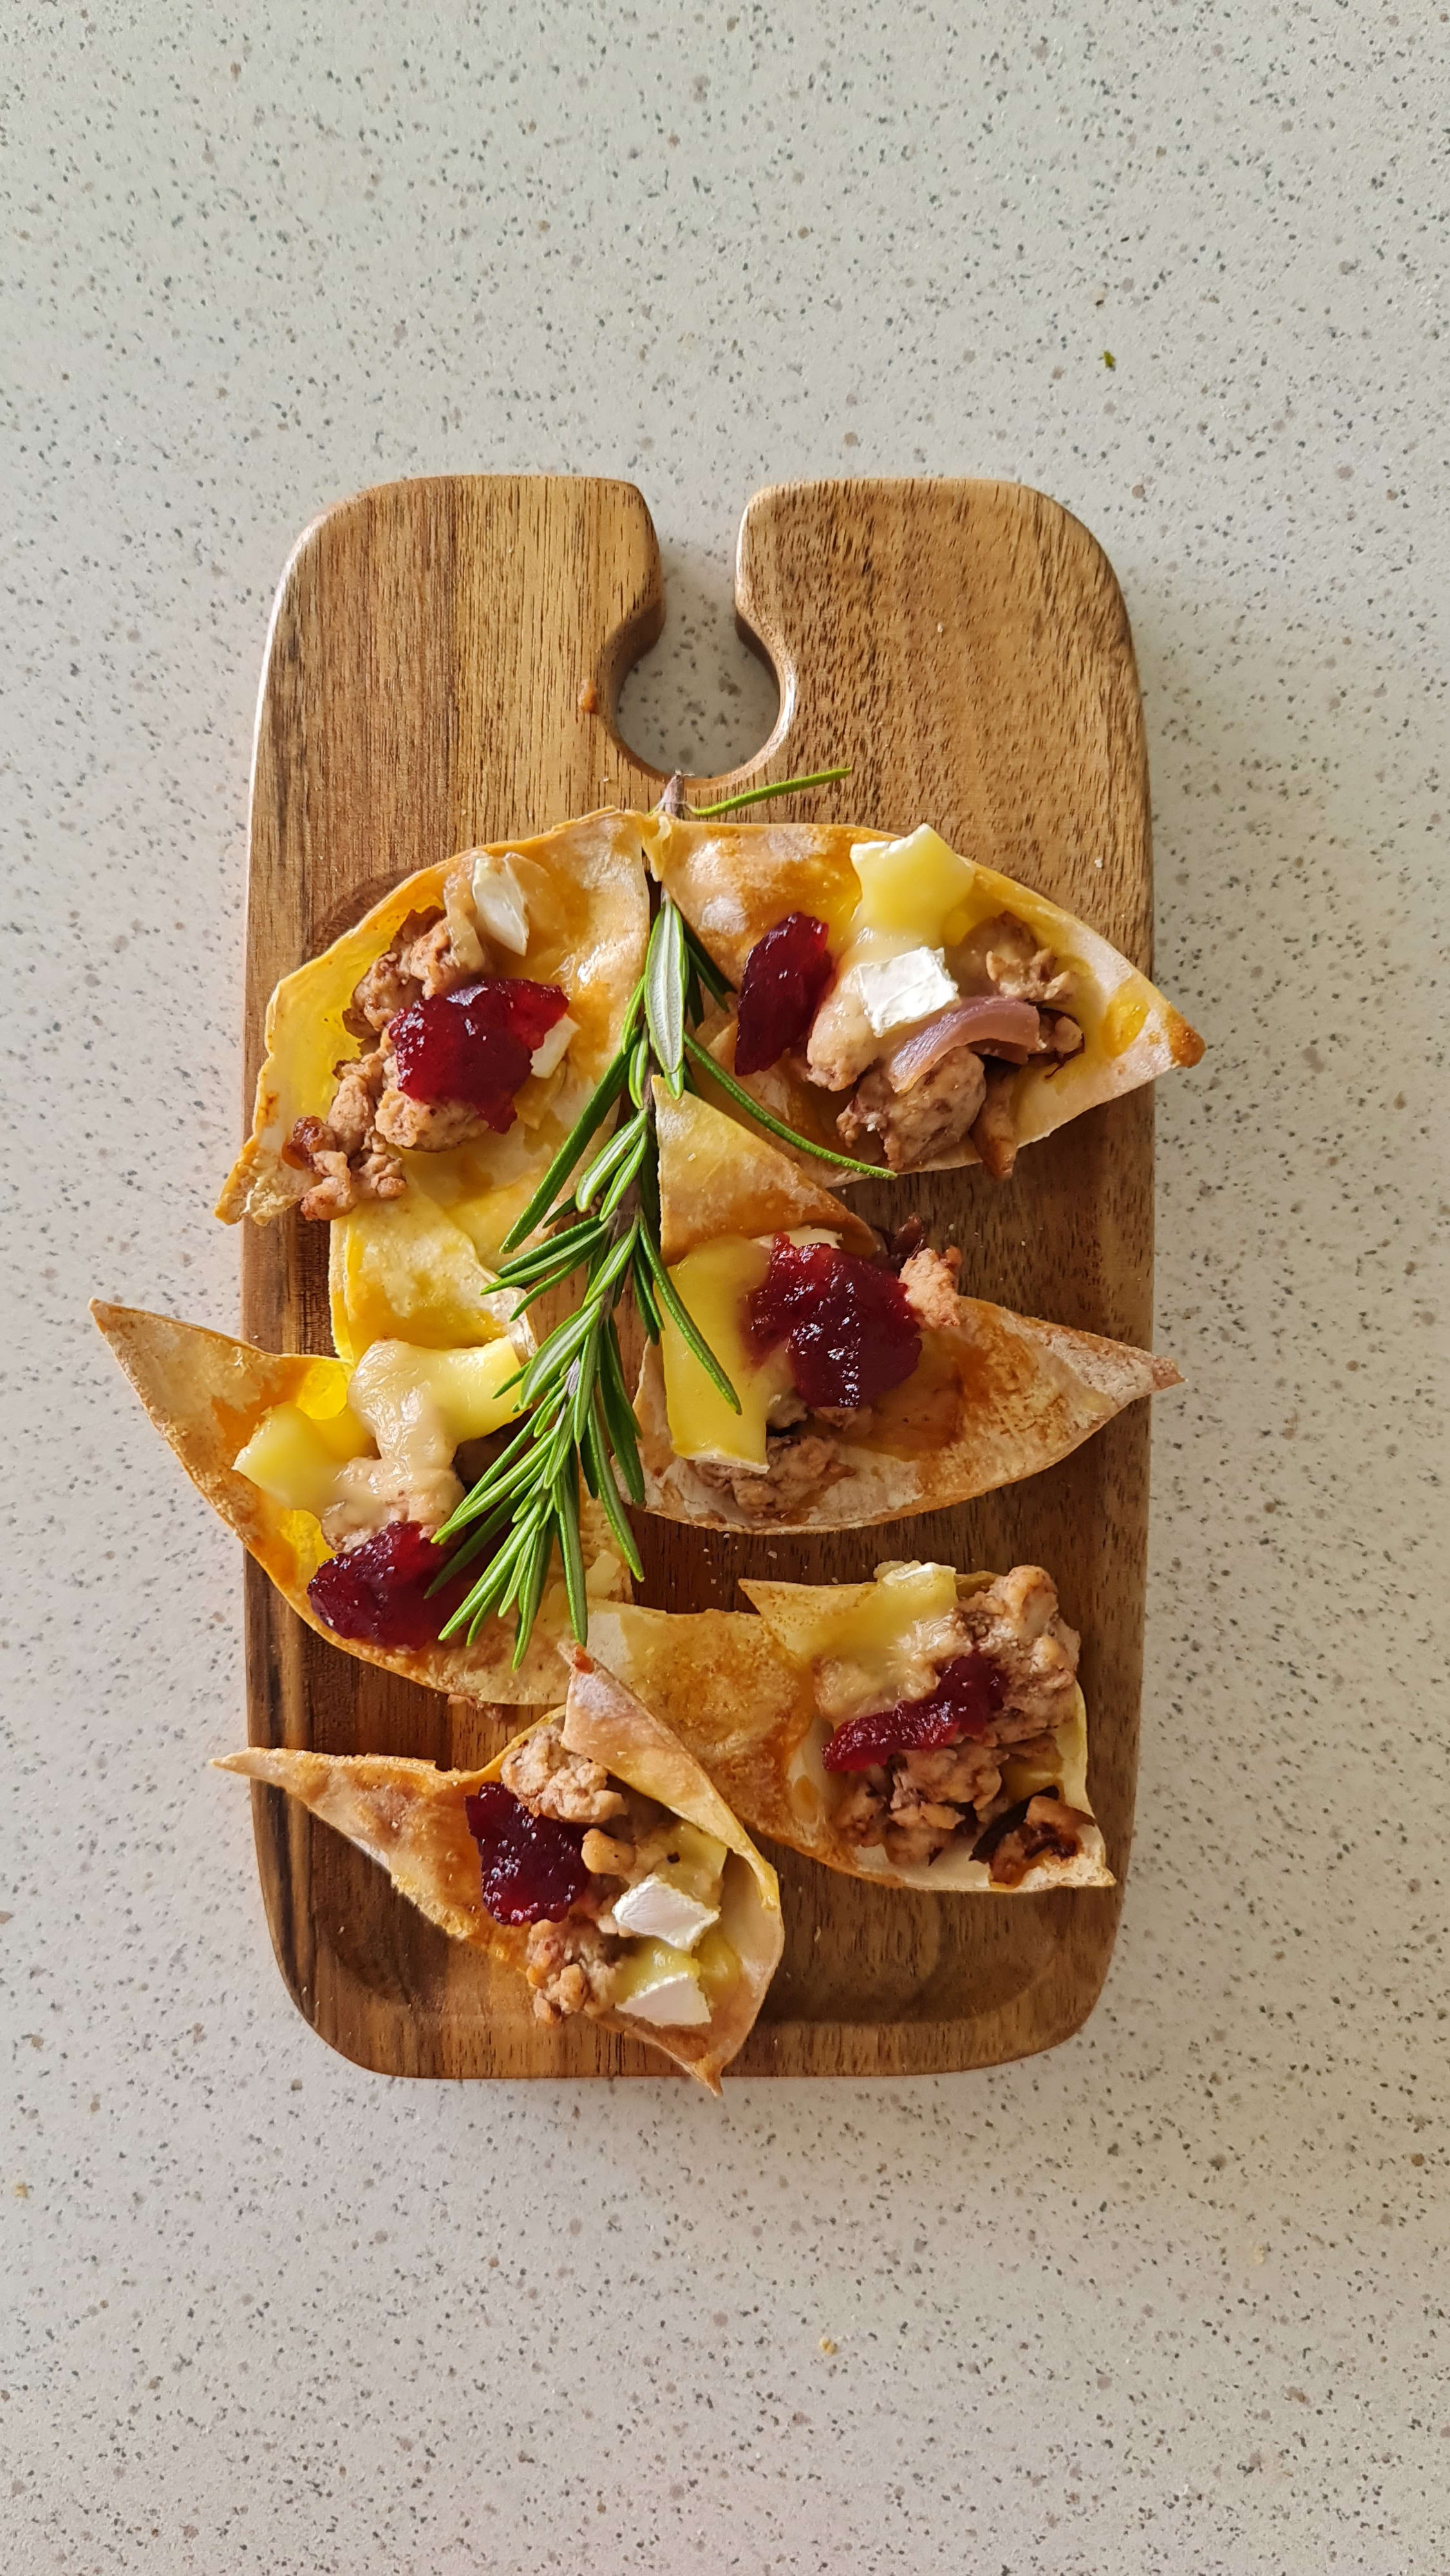 Photo of Lyndal's Christmas canapes by WW